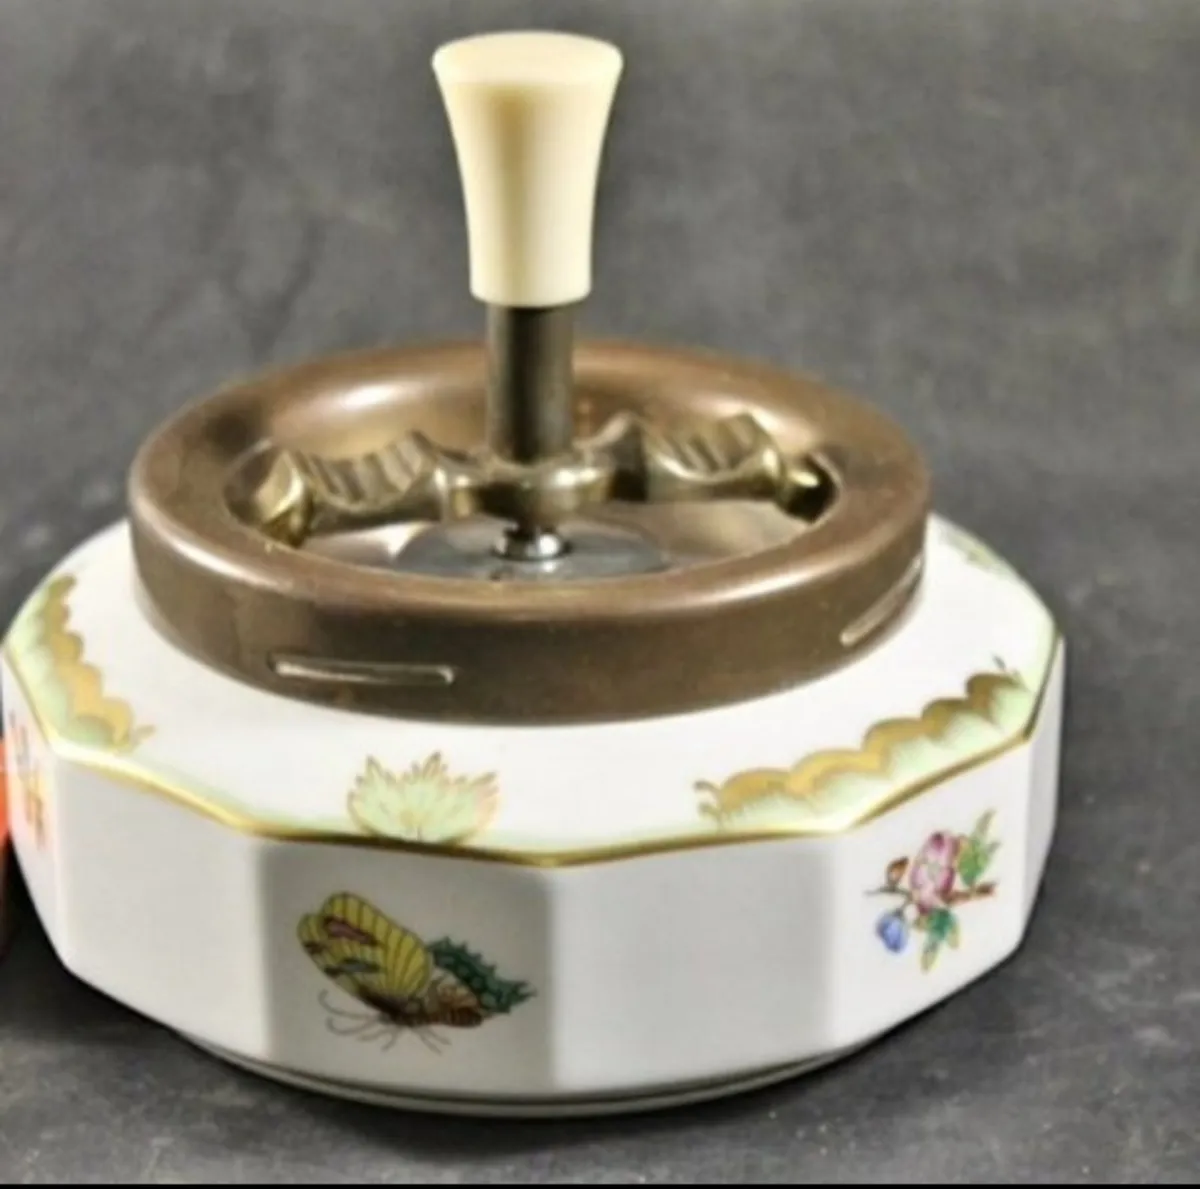 Very rare Herend ashtray with metal insert